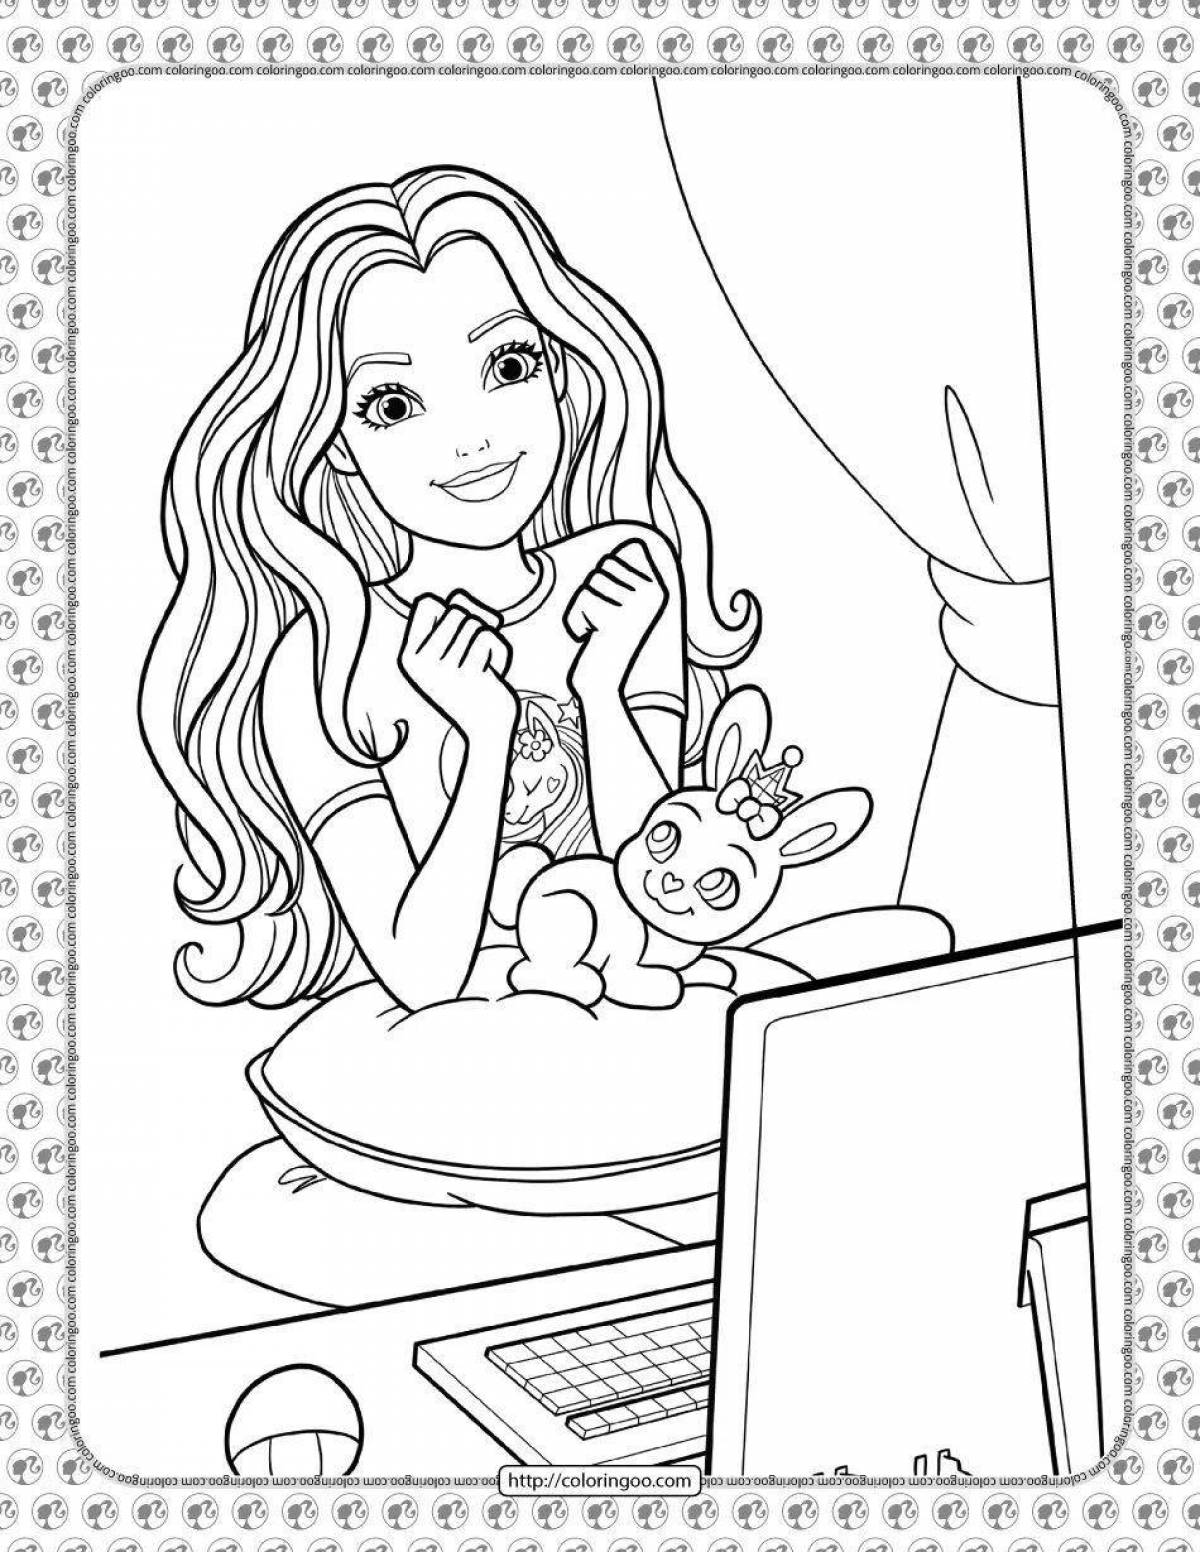 Coloring page happy barbie doctor